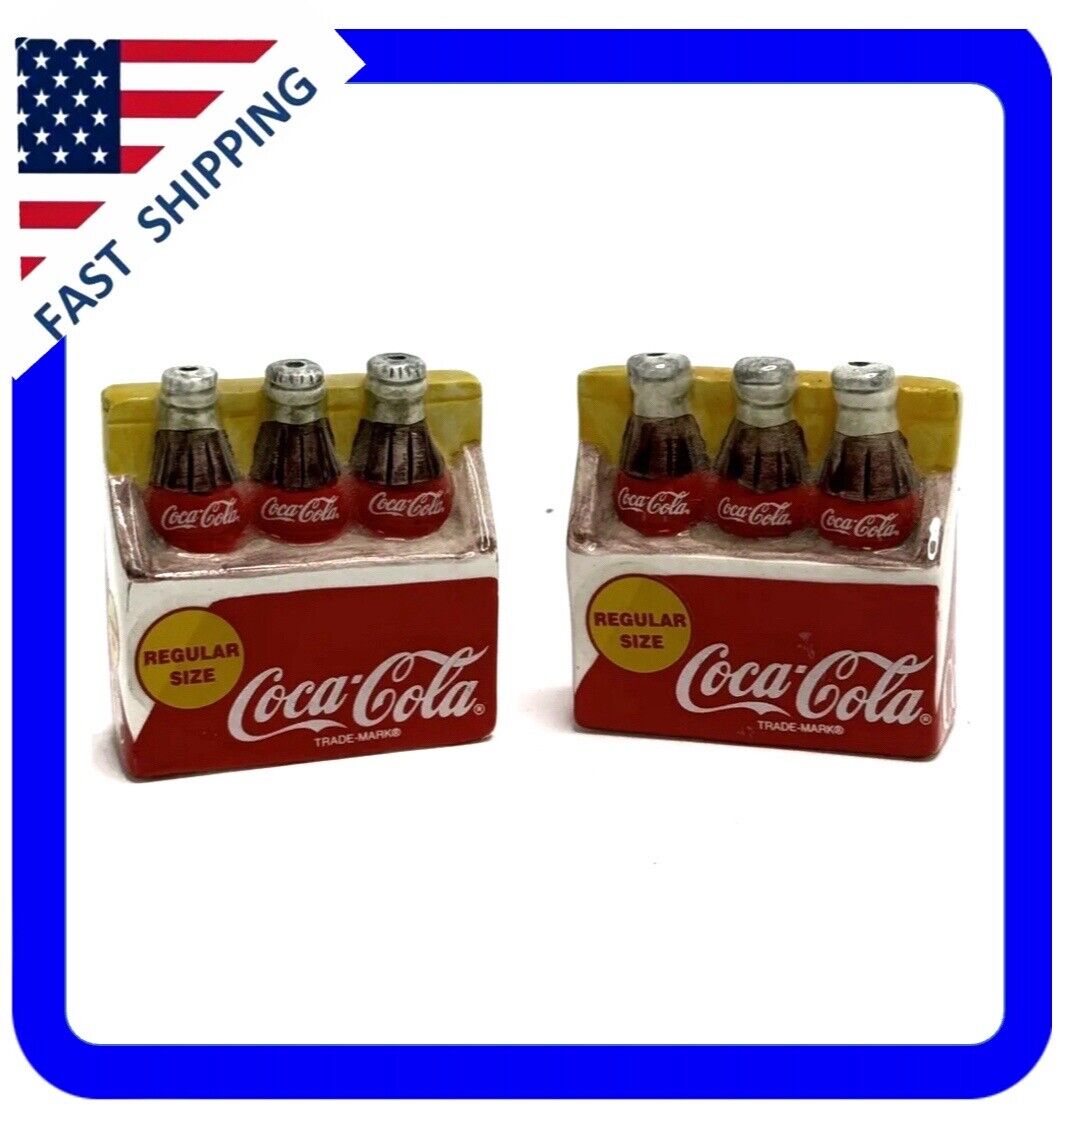 1996 Coca-Cola Six Pack Ceramic Salt and Pepper Shakers by The Coca-Cola Company